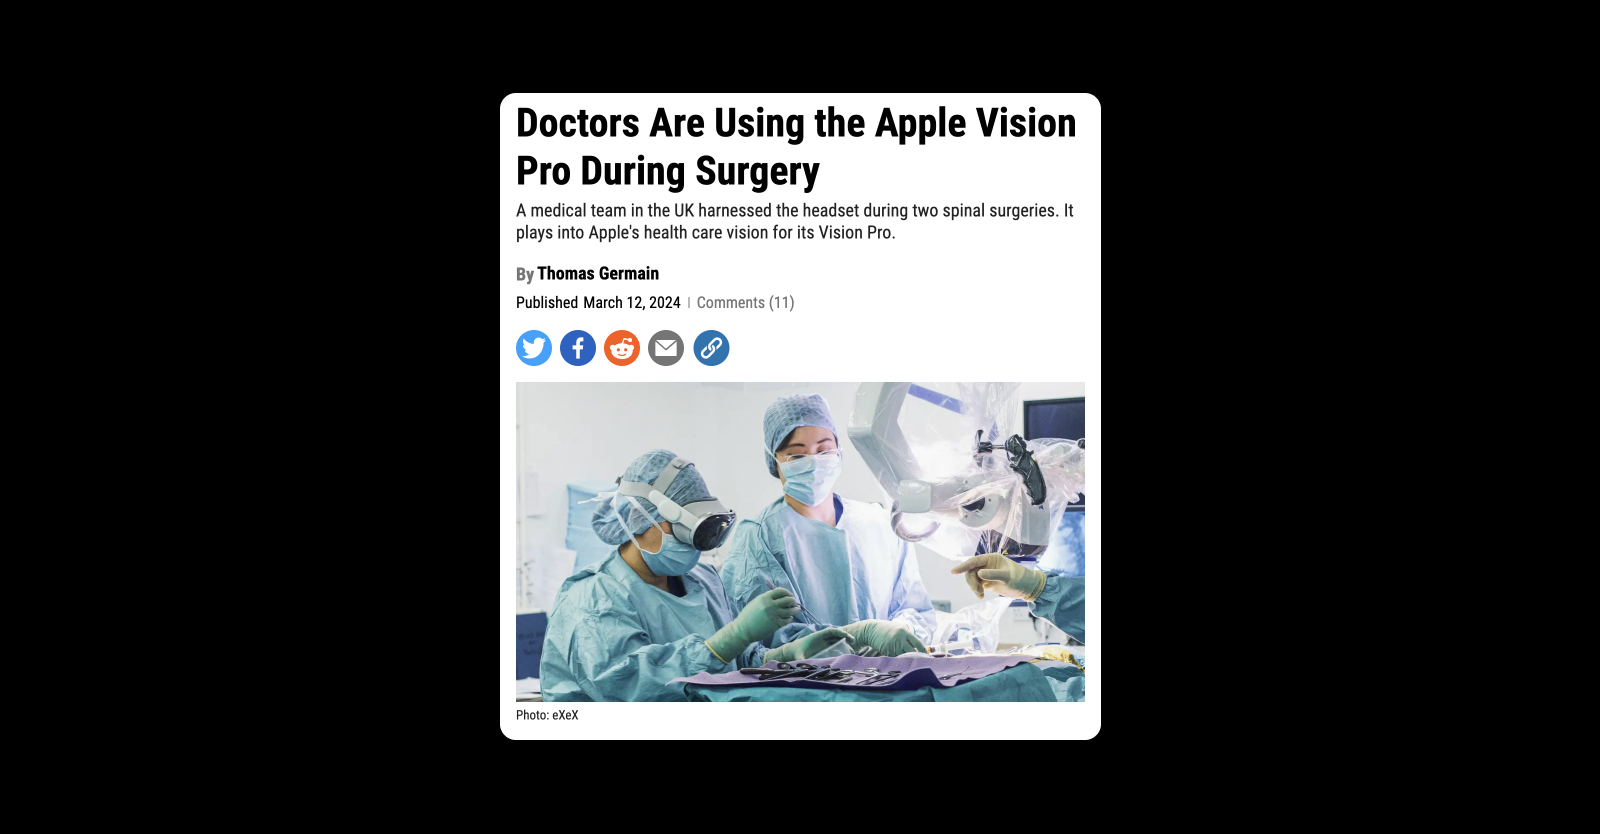 Фото из статьи https://gizmodo.com/doctors-are-using-the-apple-vision-pro-during-surgery-1851329884